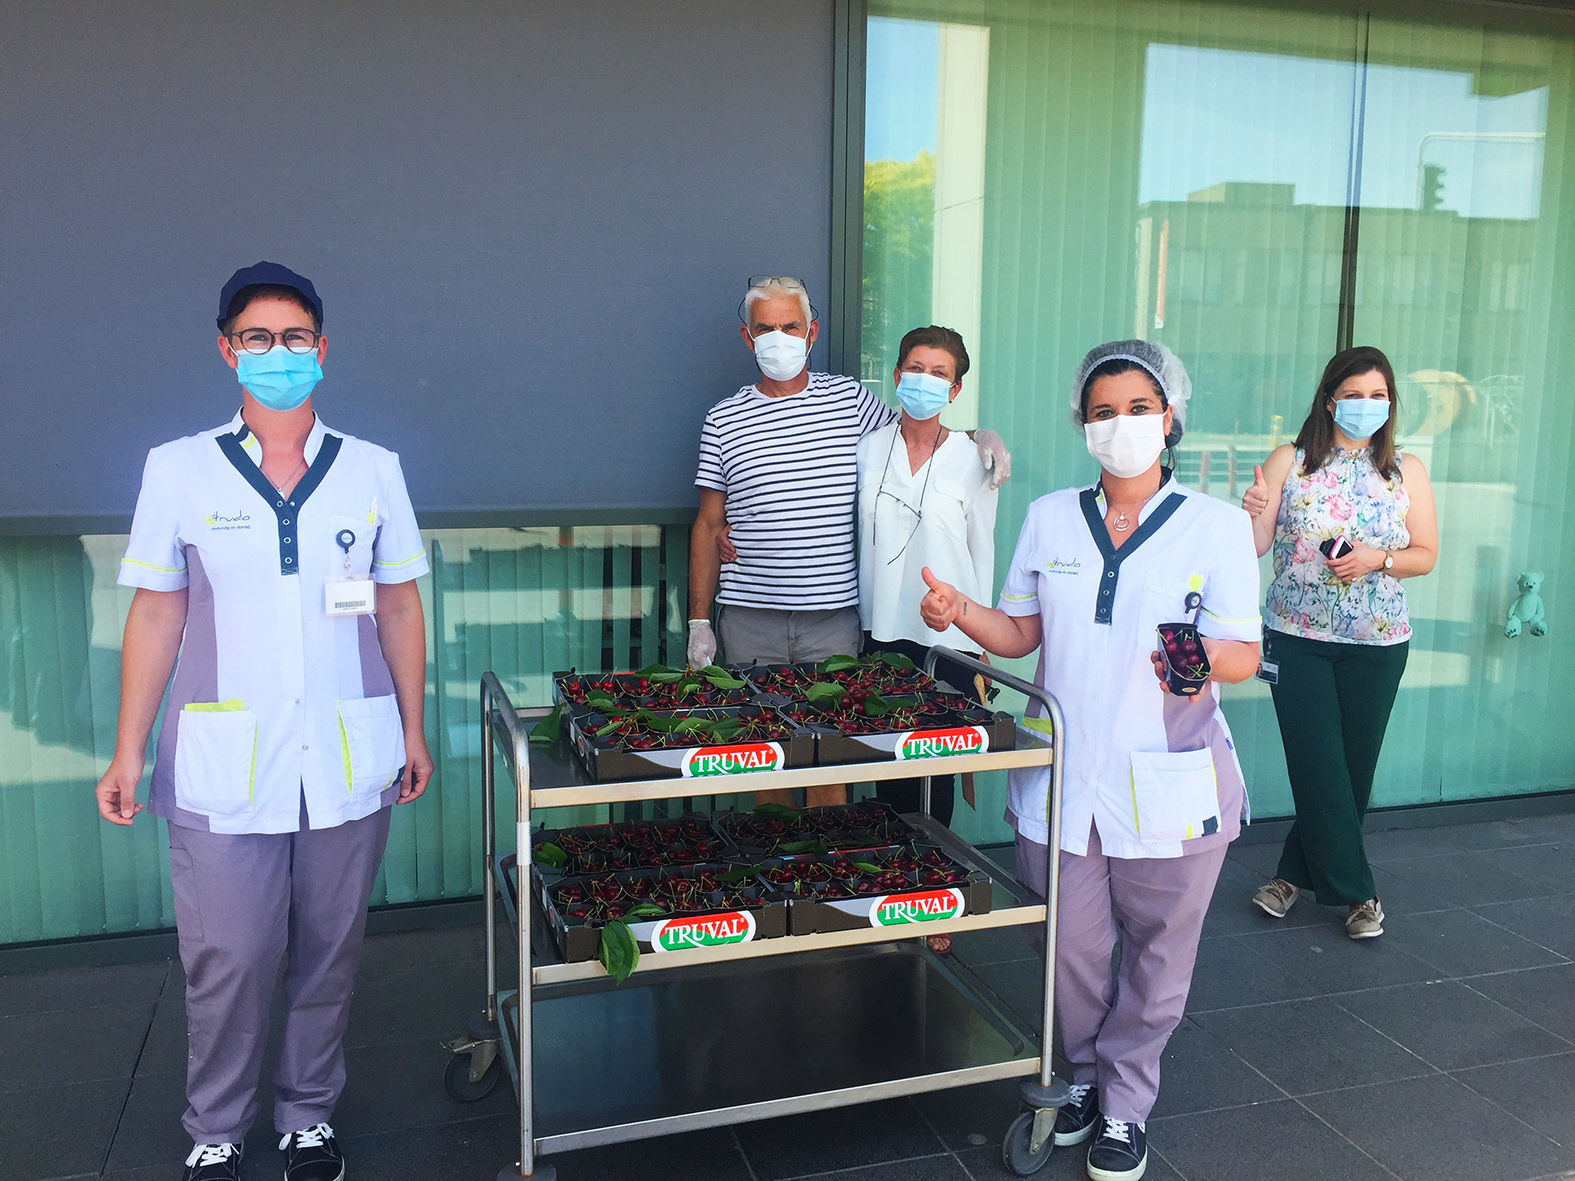 First Belgian cherries of the new season are for the healthcare heroes from Sint-Trudo hospital in Sint-Truiden